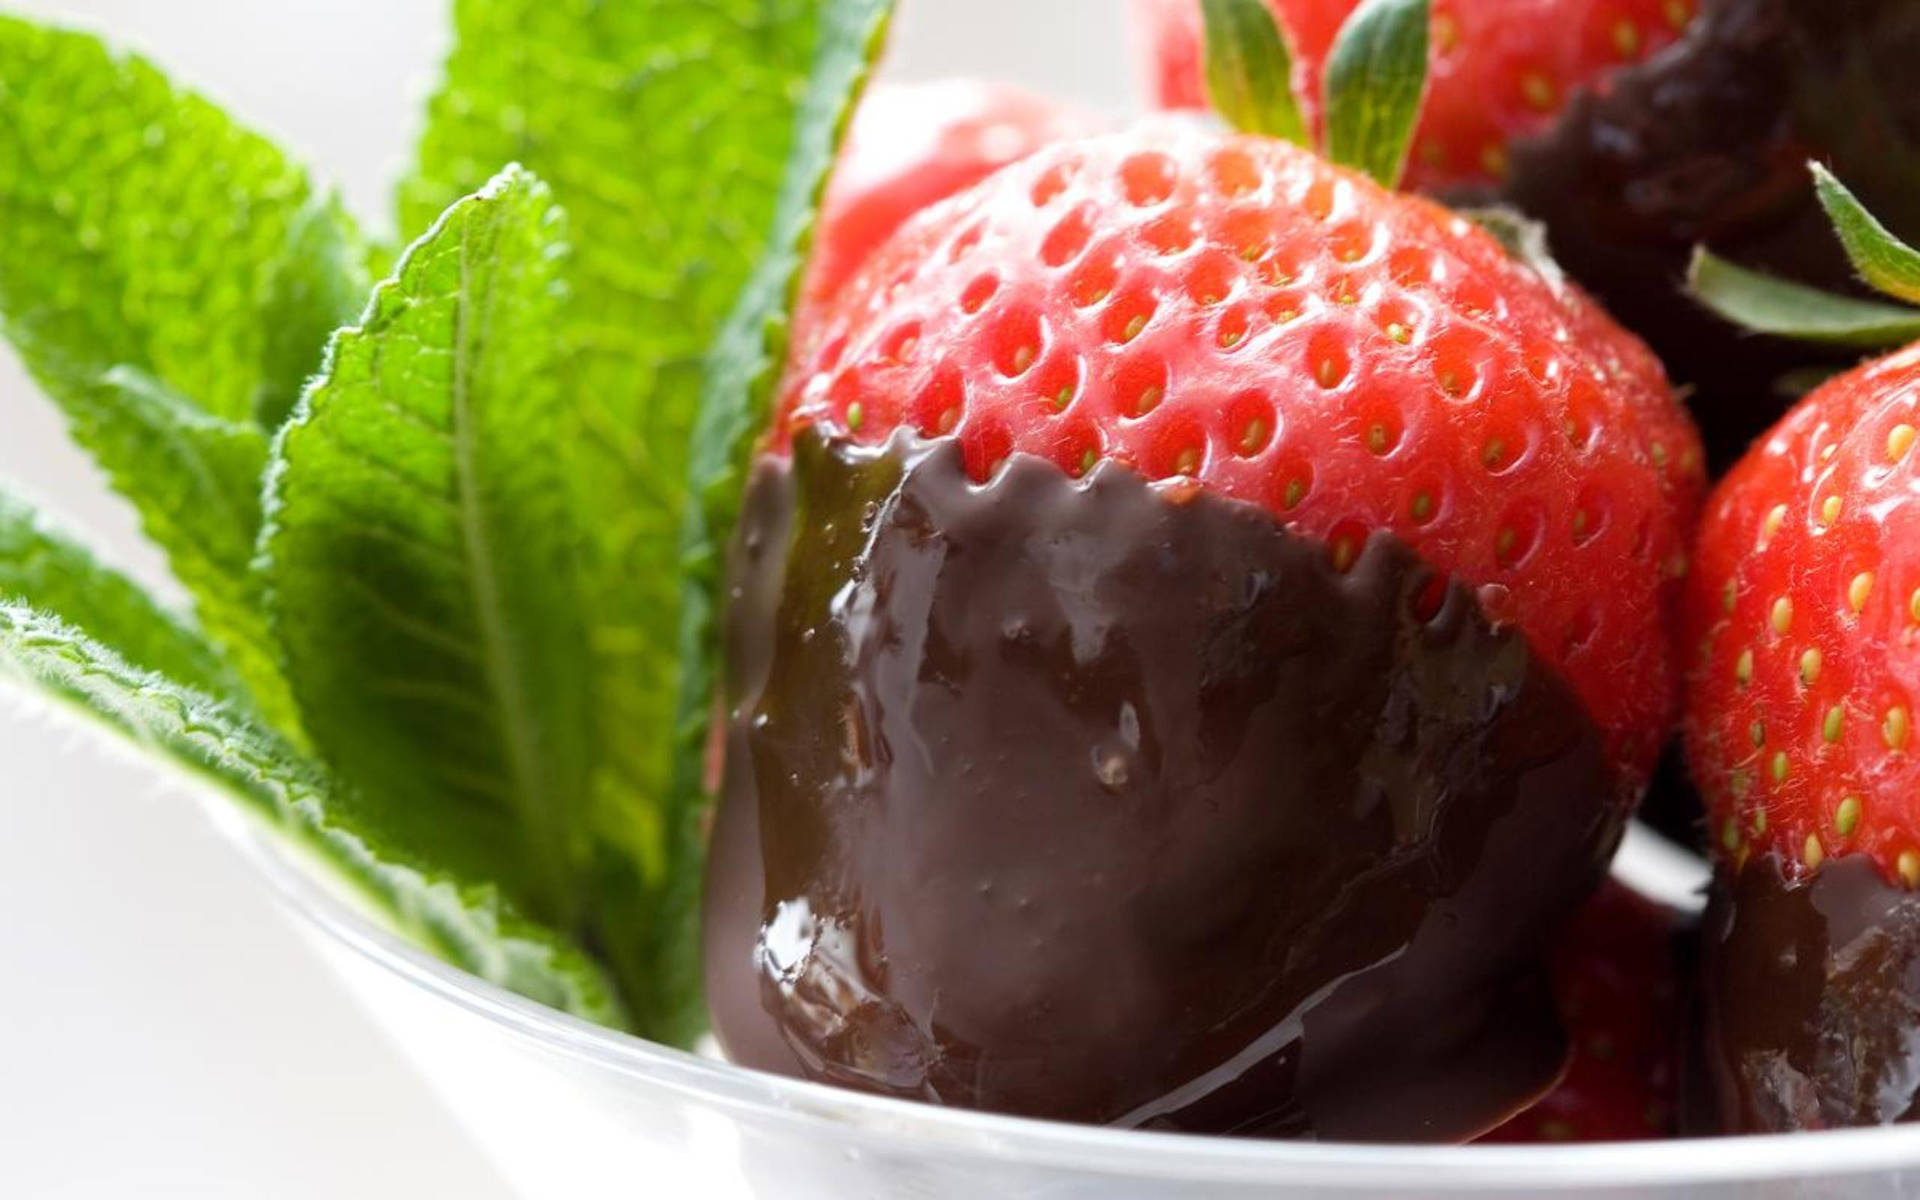 Sweet Chocolate Dipped Strawberry